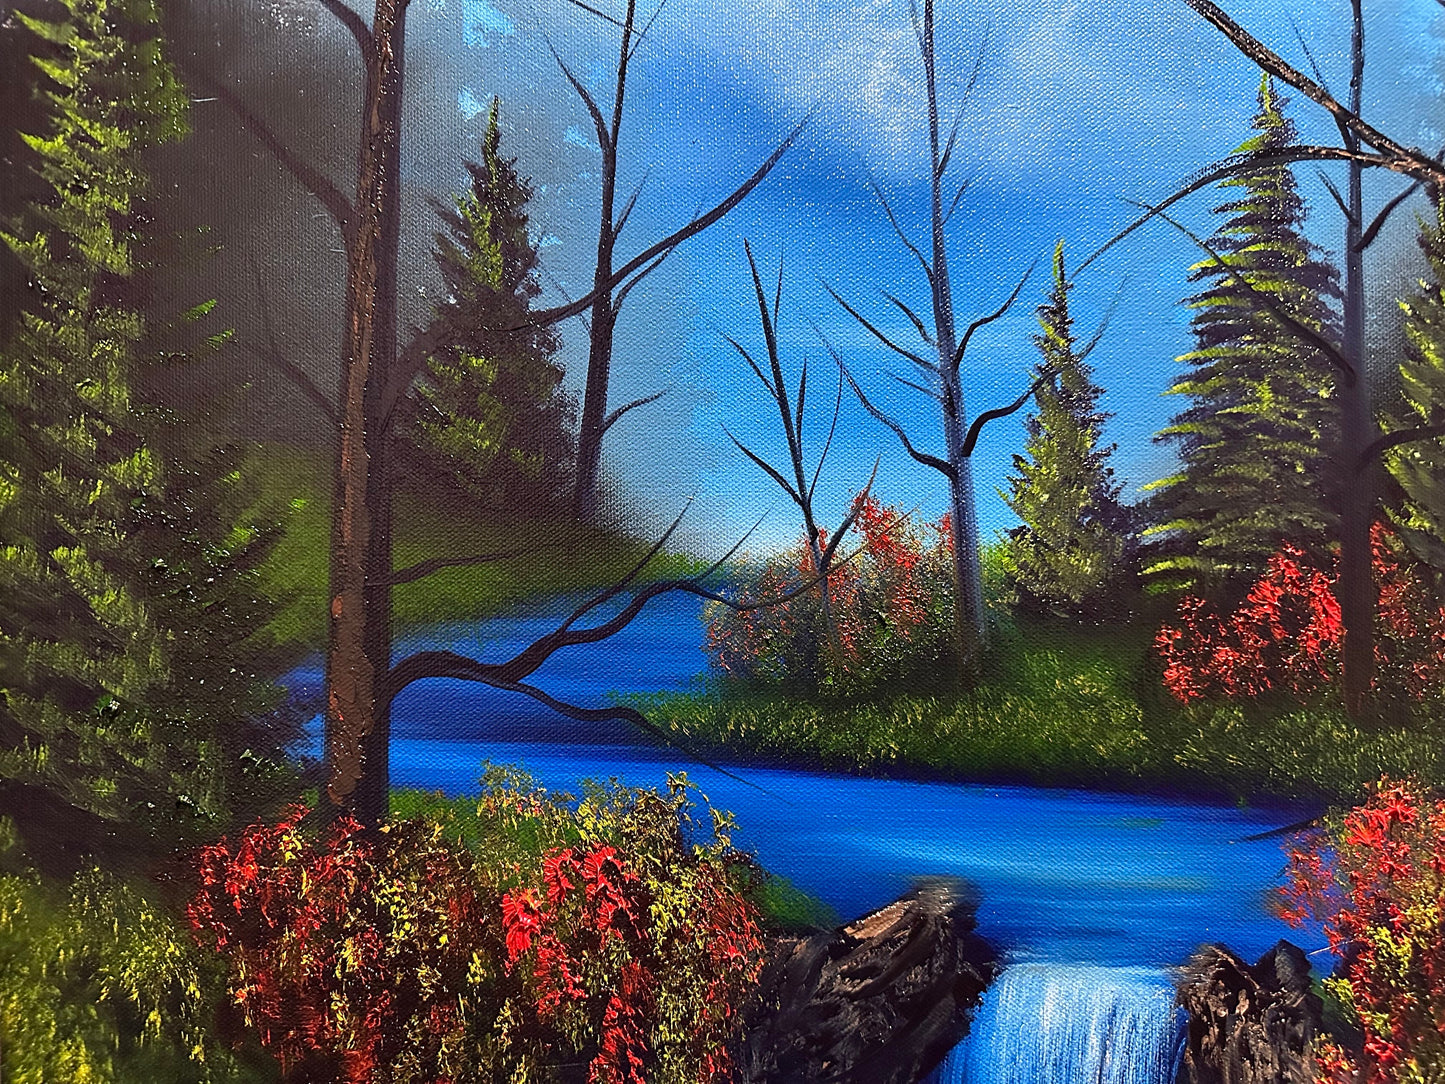 Painting 999 - 24x30" Pro Series Canvas Sunset Canyon Waterfall painted live on TikTok on 11/3/23 by PaintWithJosh